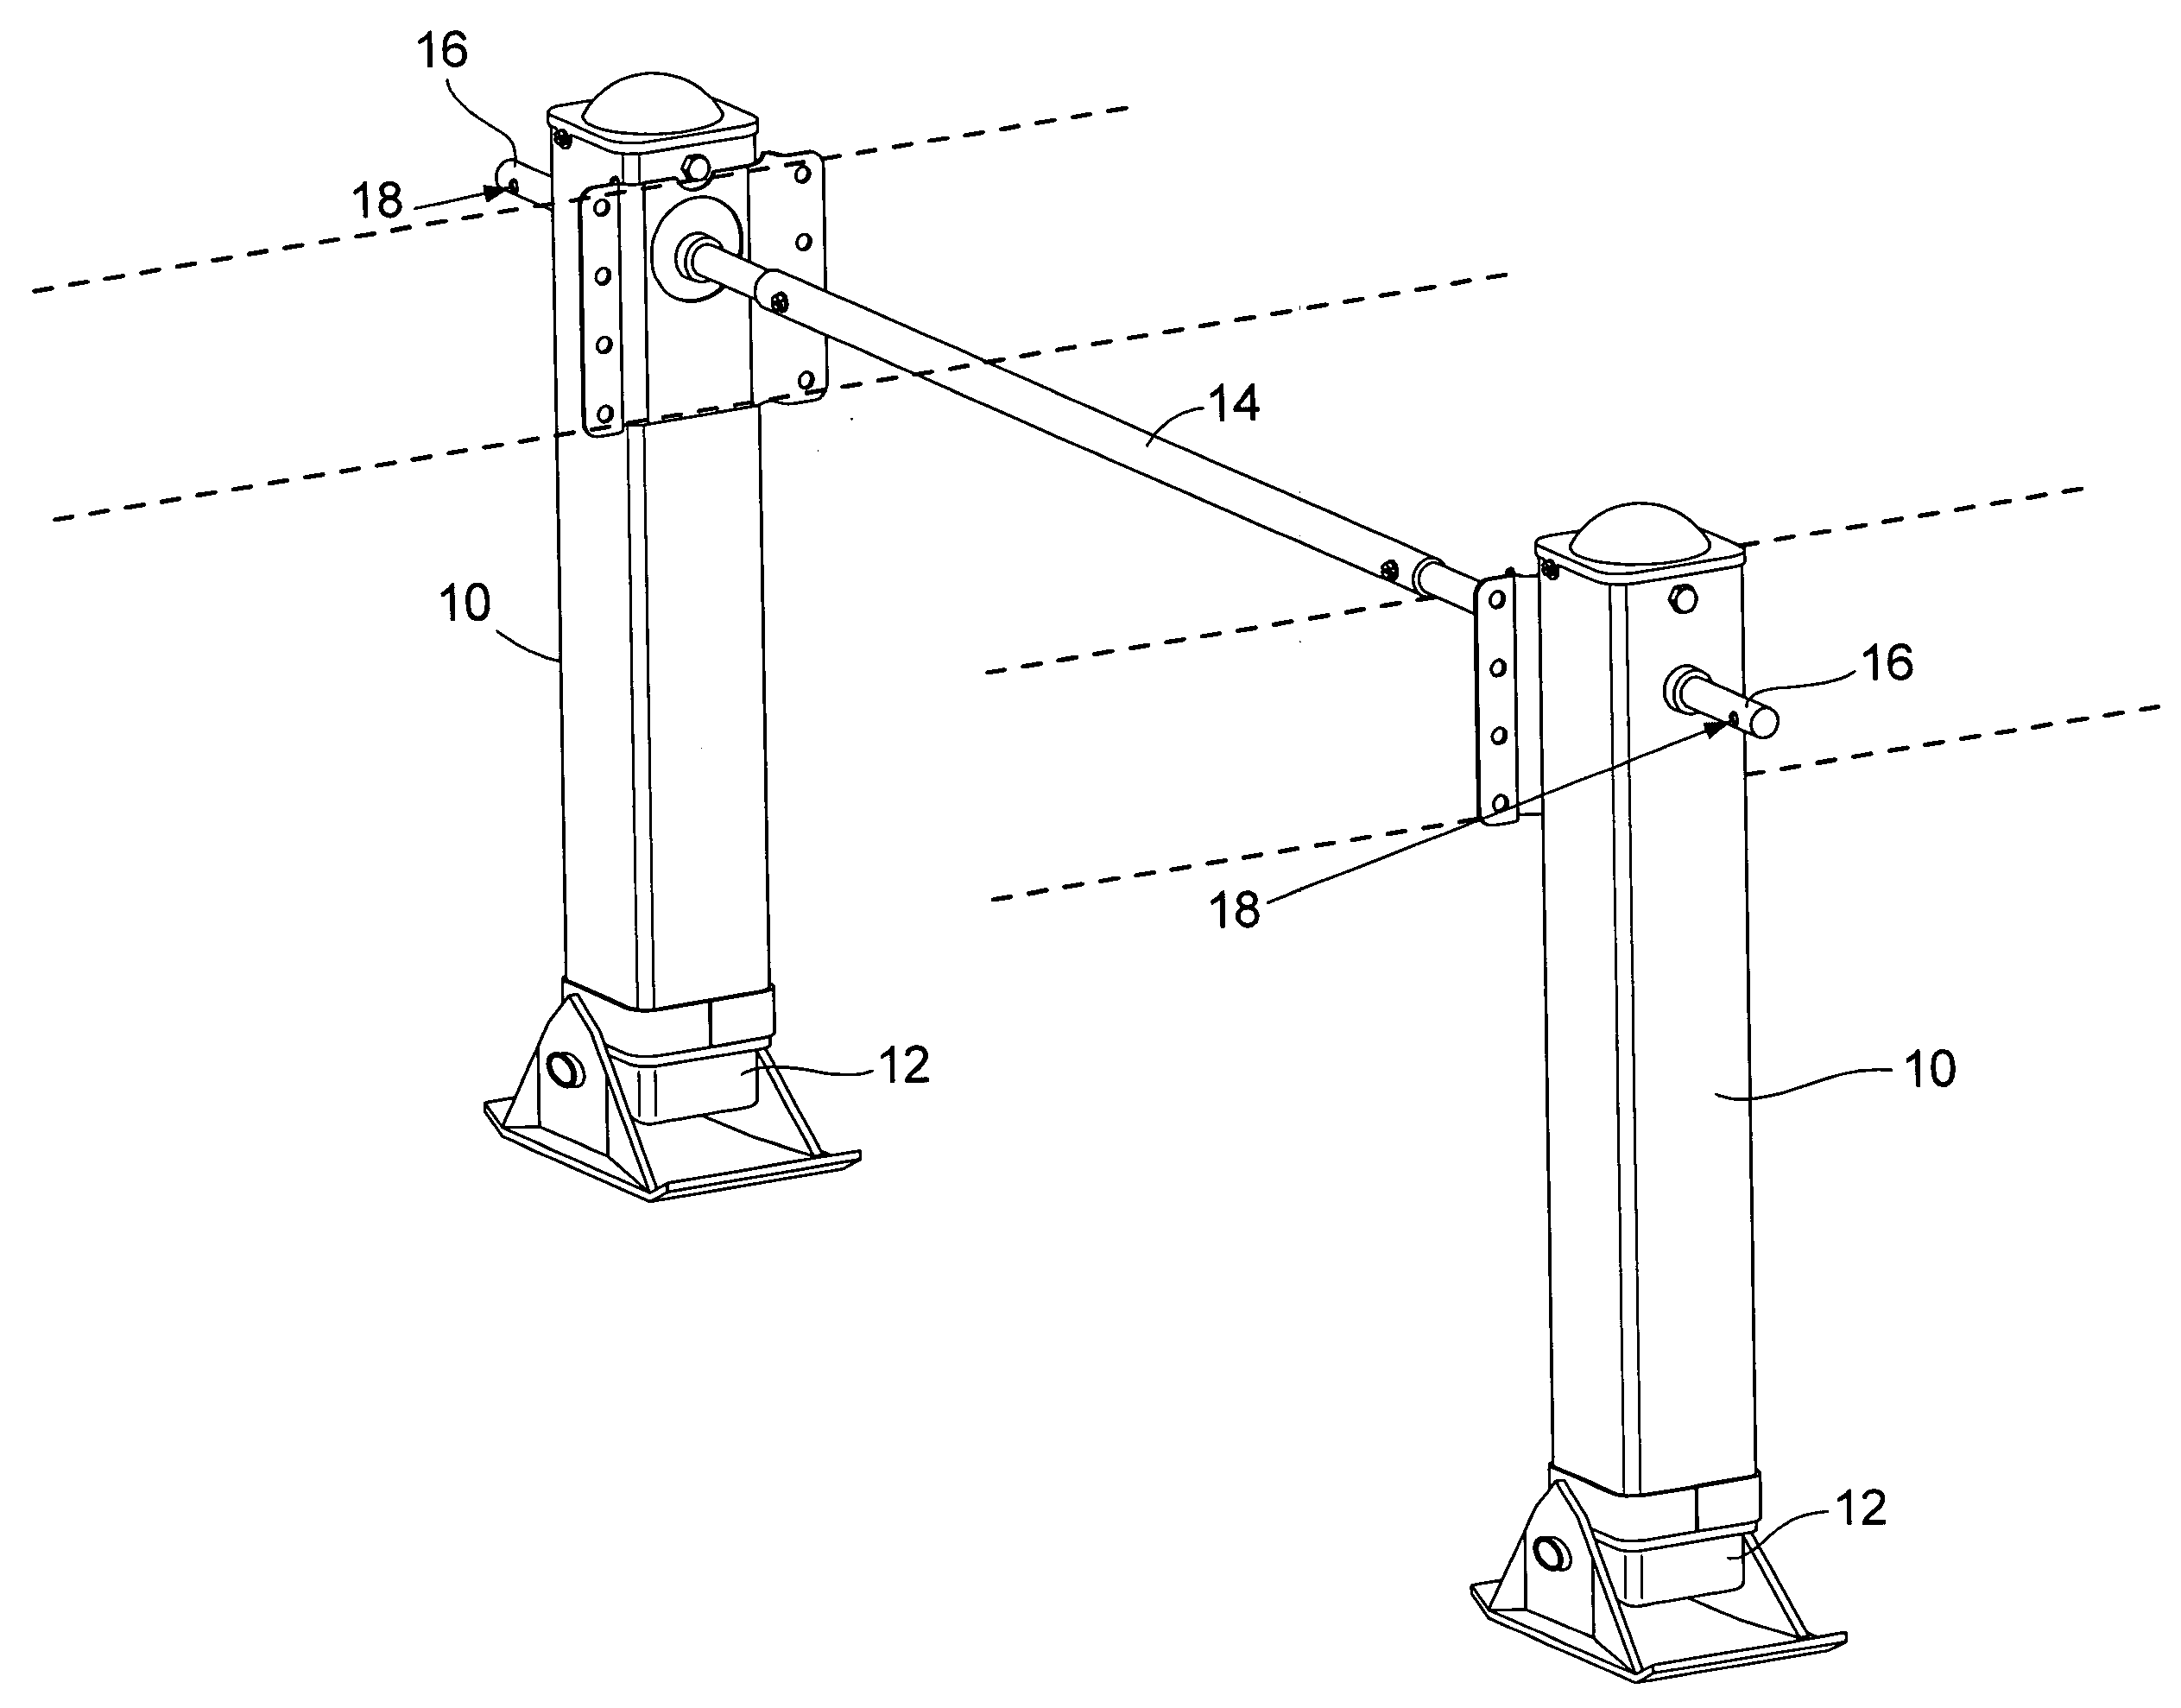 Speed crank locking device for trailer landing gear assembly